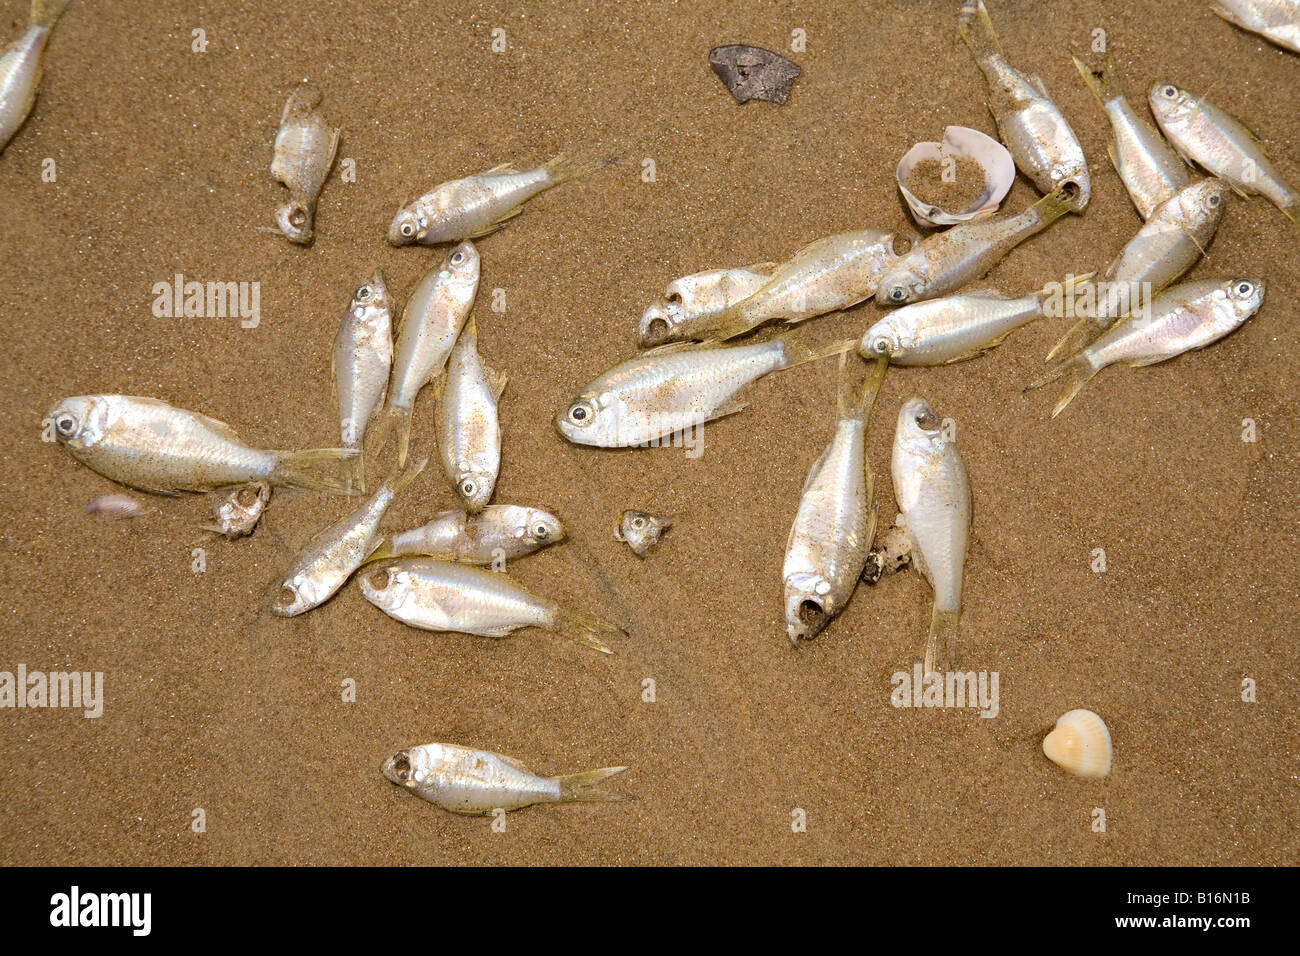 Dead fish on Bekal Fort Beach near Kasaragod, Kerala. The fish have been cast aside by fishermen. Stock Photo